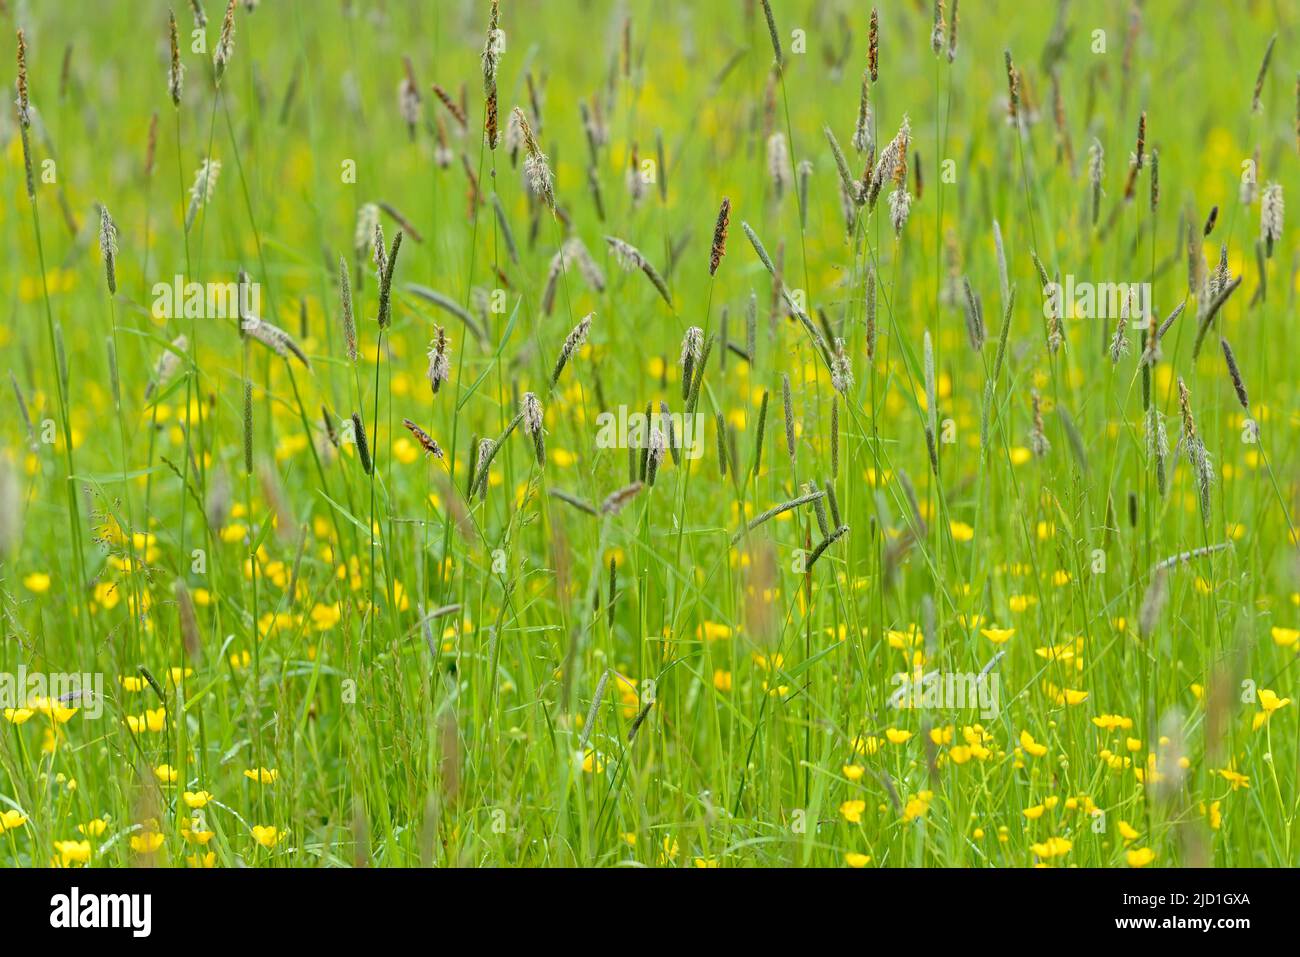 Meadow with buttercup (Ranunculus) and sweet grass meadow foxtail (Alopecurus pratensis), Allgaeu Alps, Allgaeu, Bavaria, Germany Stock Photo